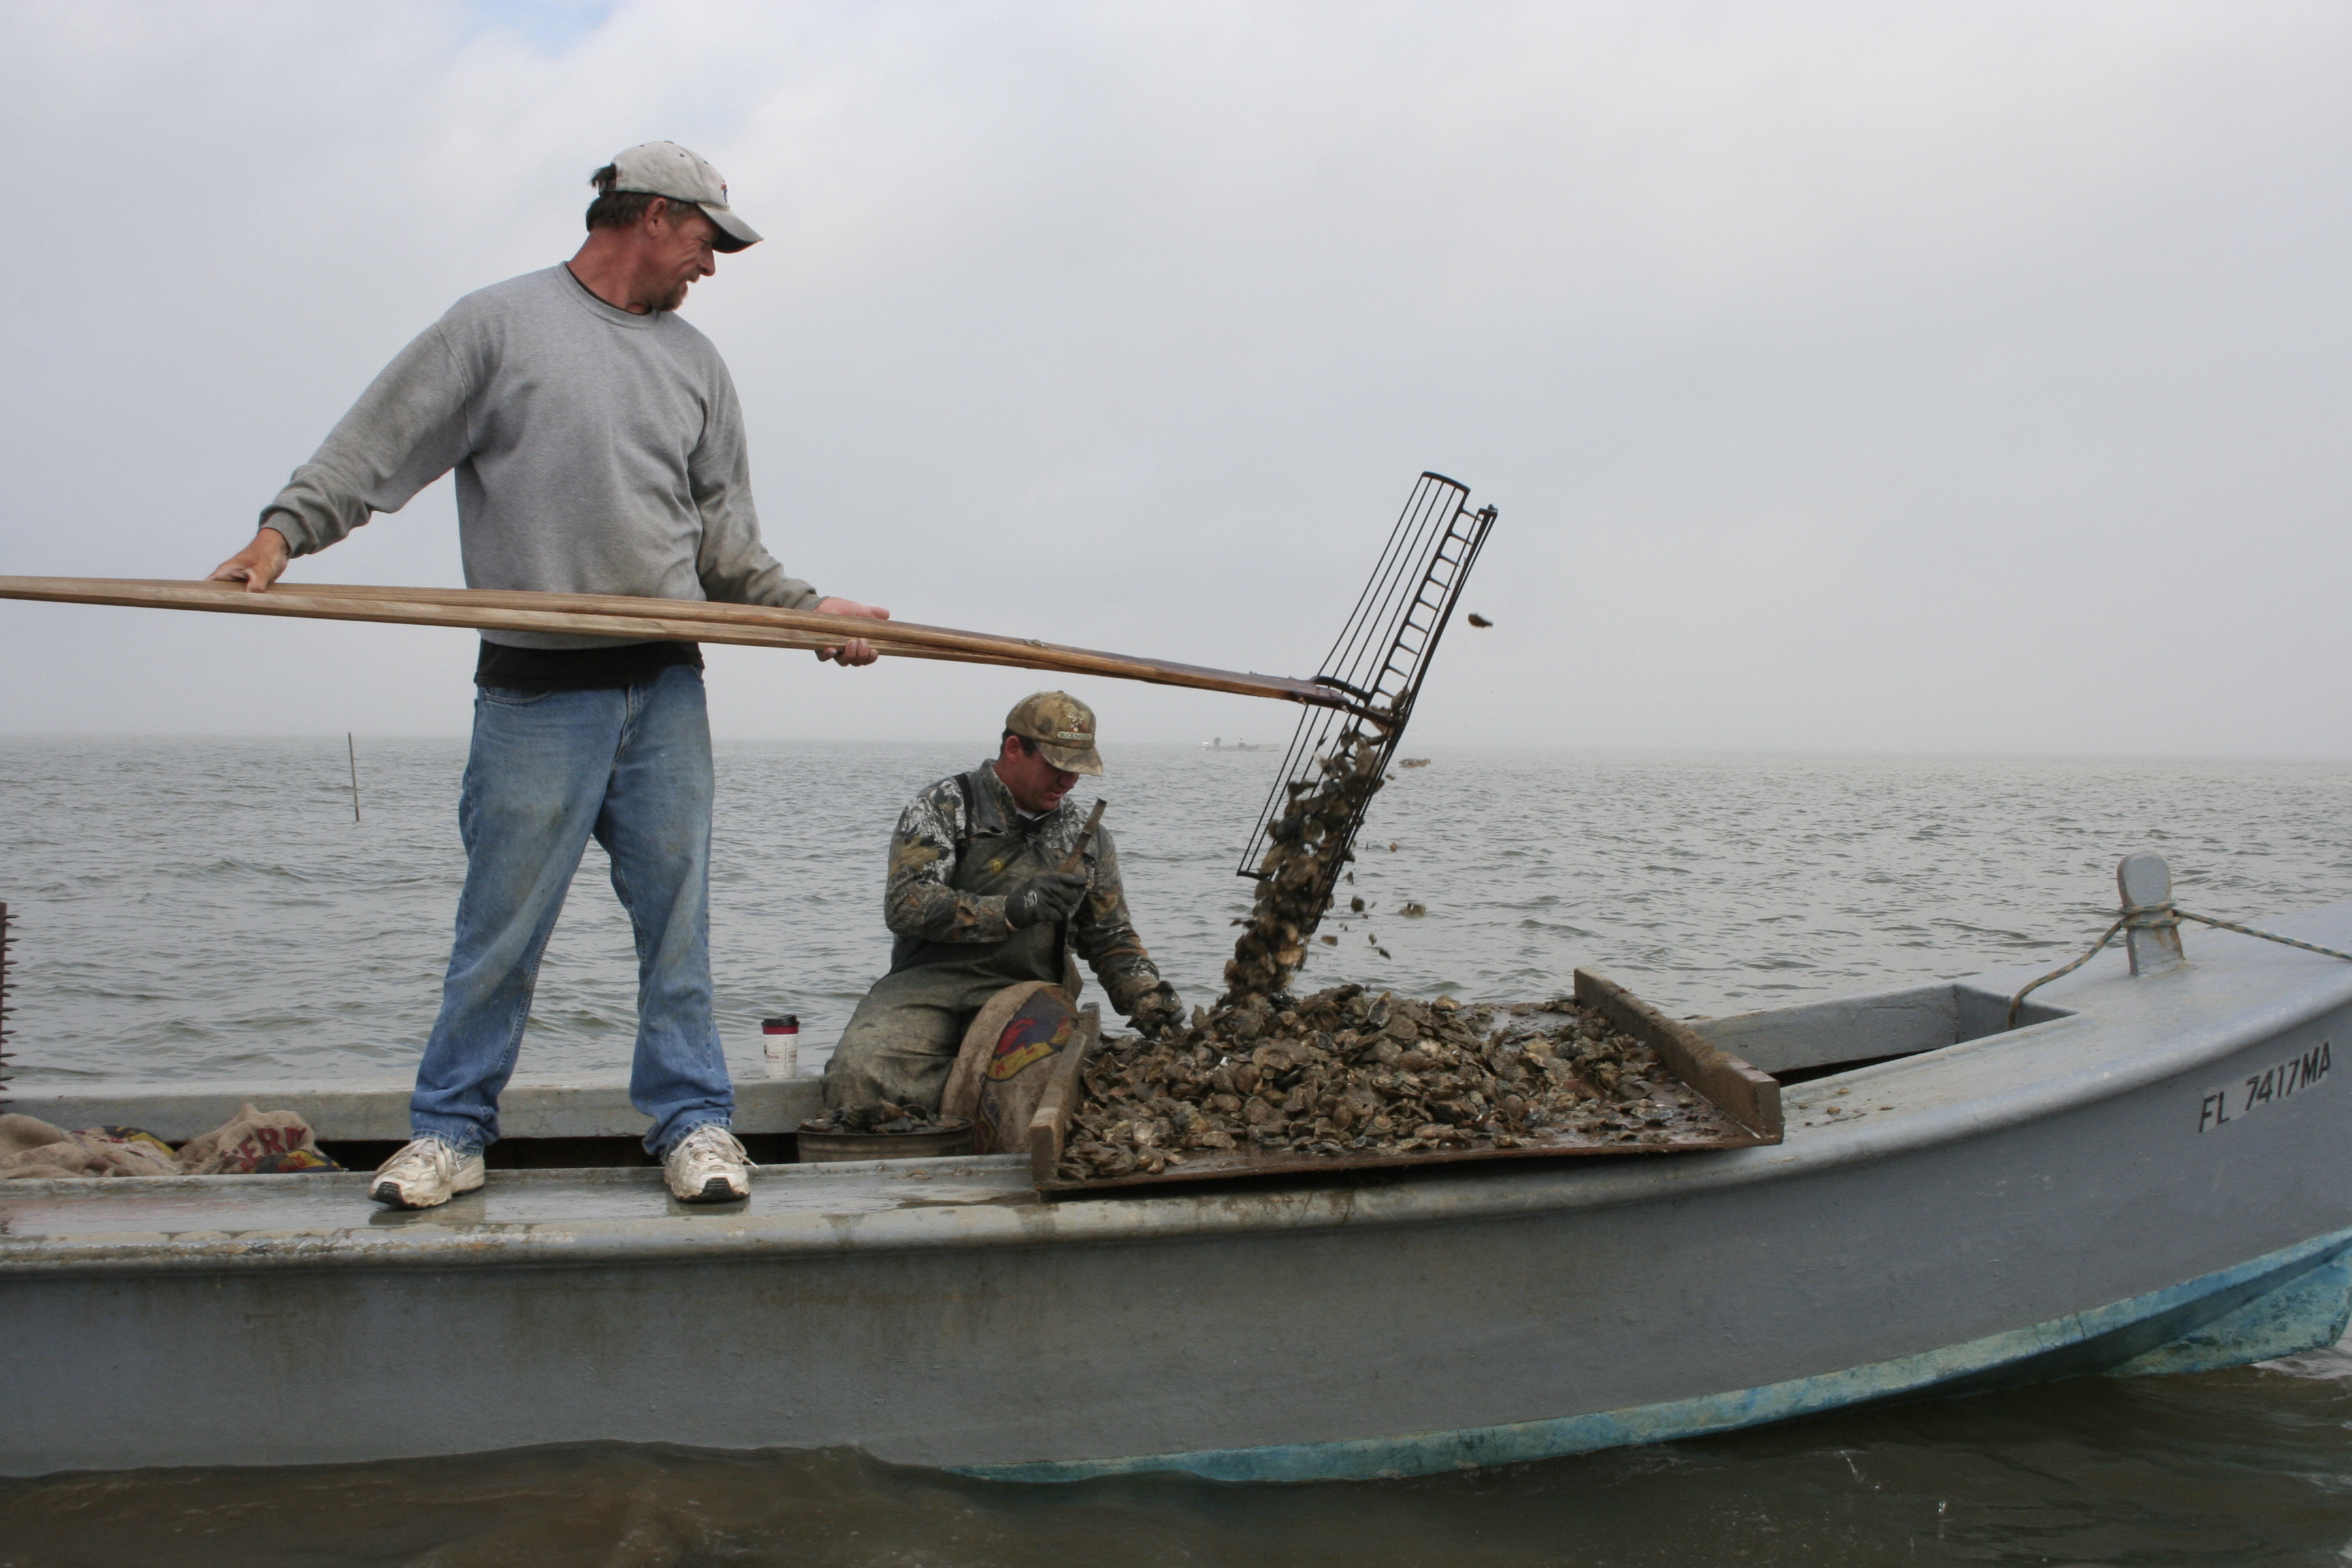 Fishermen oystering in Apalachicola Bay. Florida's oyster industry has been in decline, which many fishers blame on Georgia's overuse of water (USFWS/Flickr)